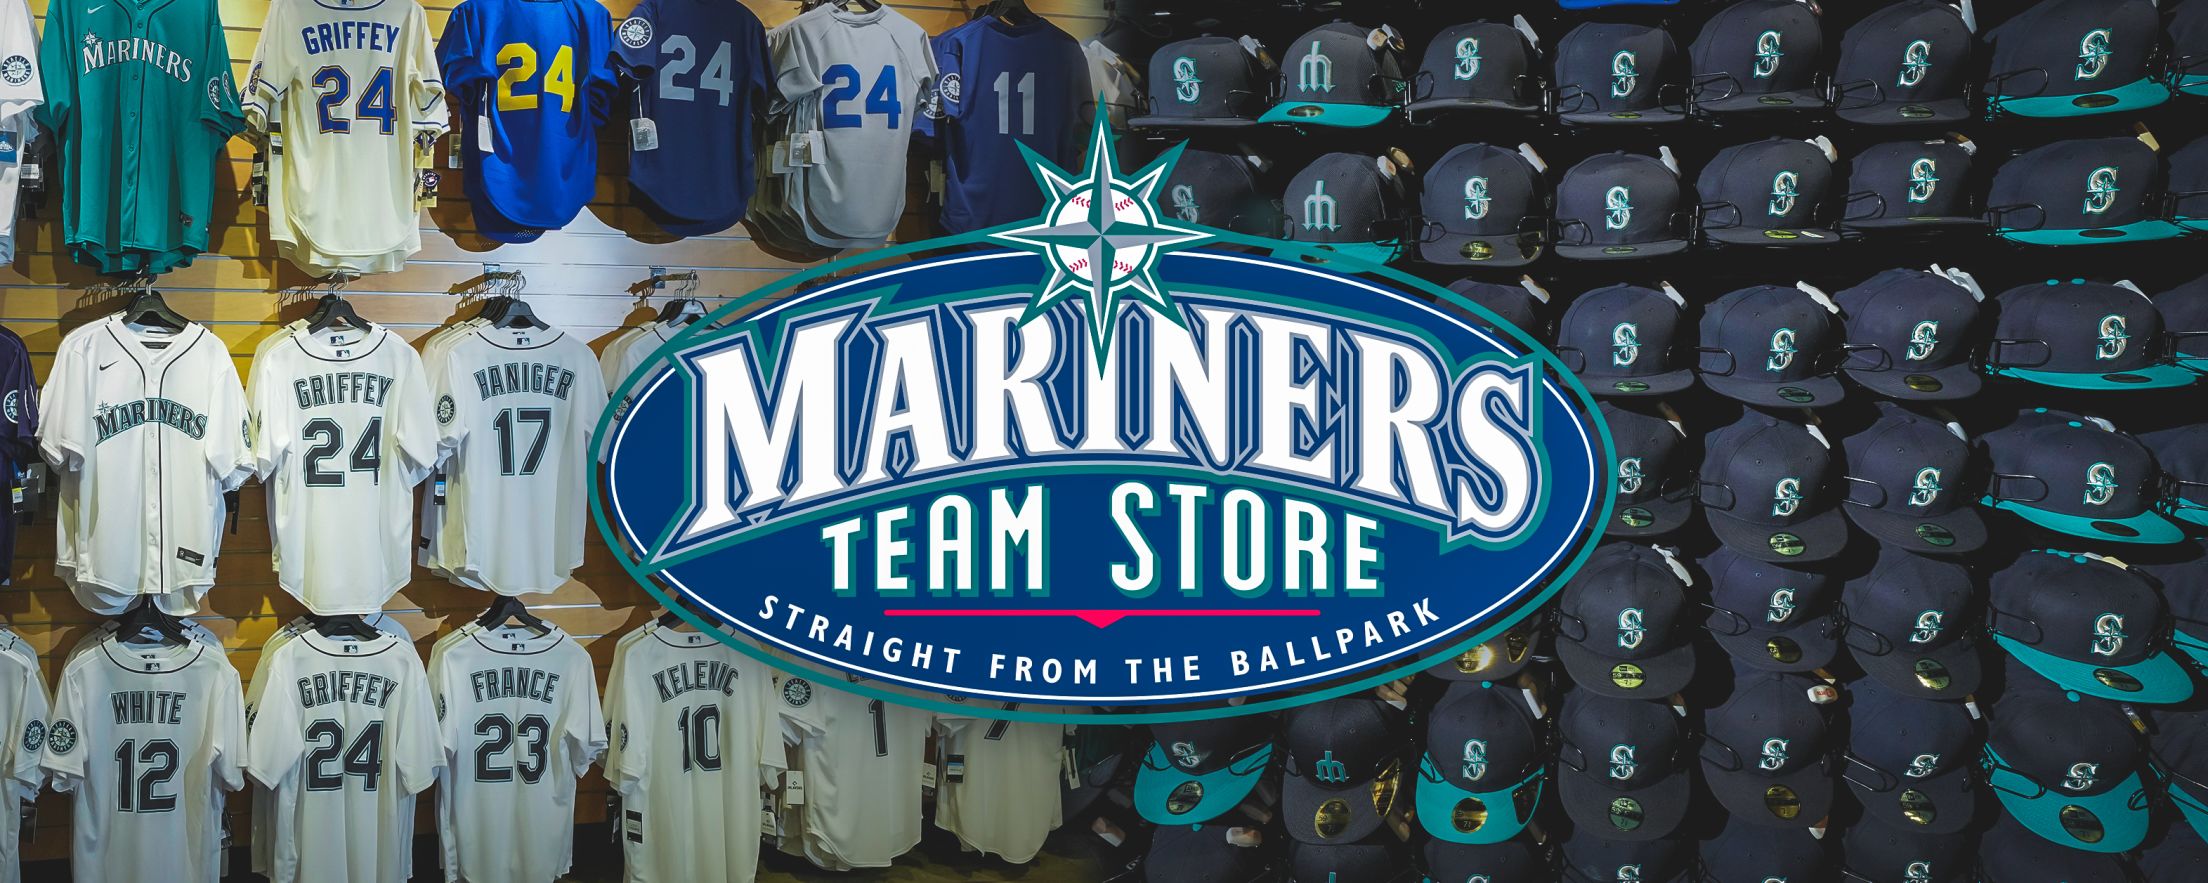 MARINERS TEAM STORE - 27 Photos & 13 Reviews - 1800 4th Ave